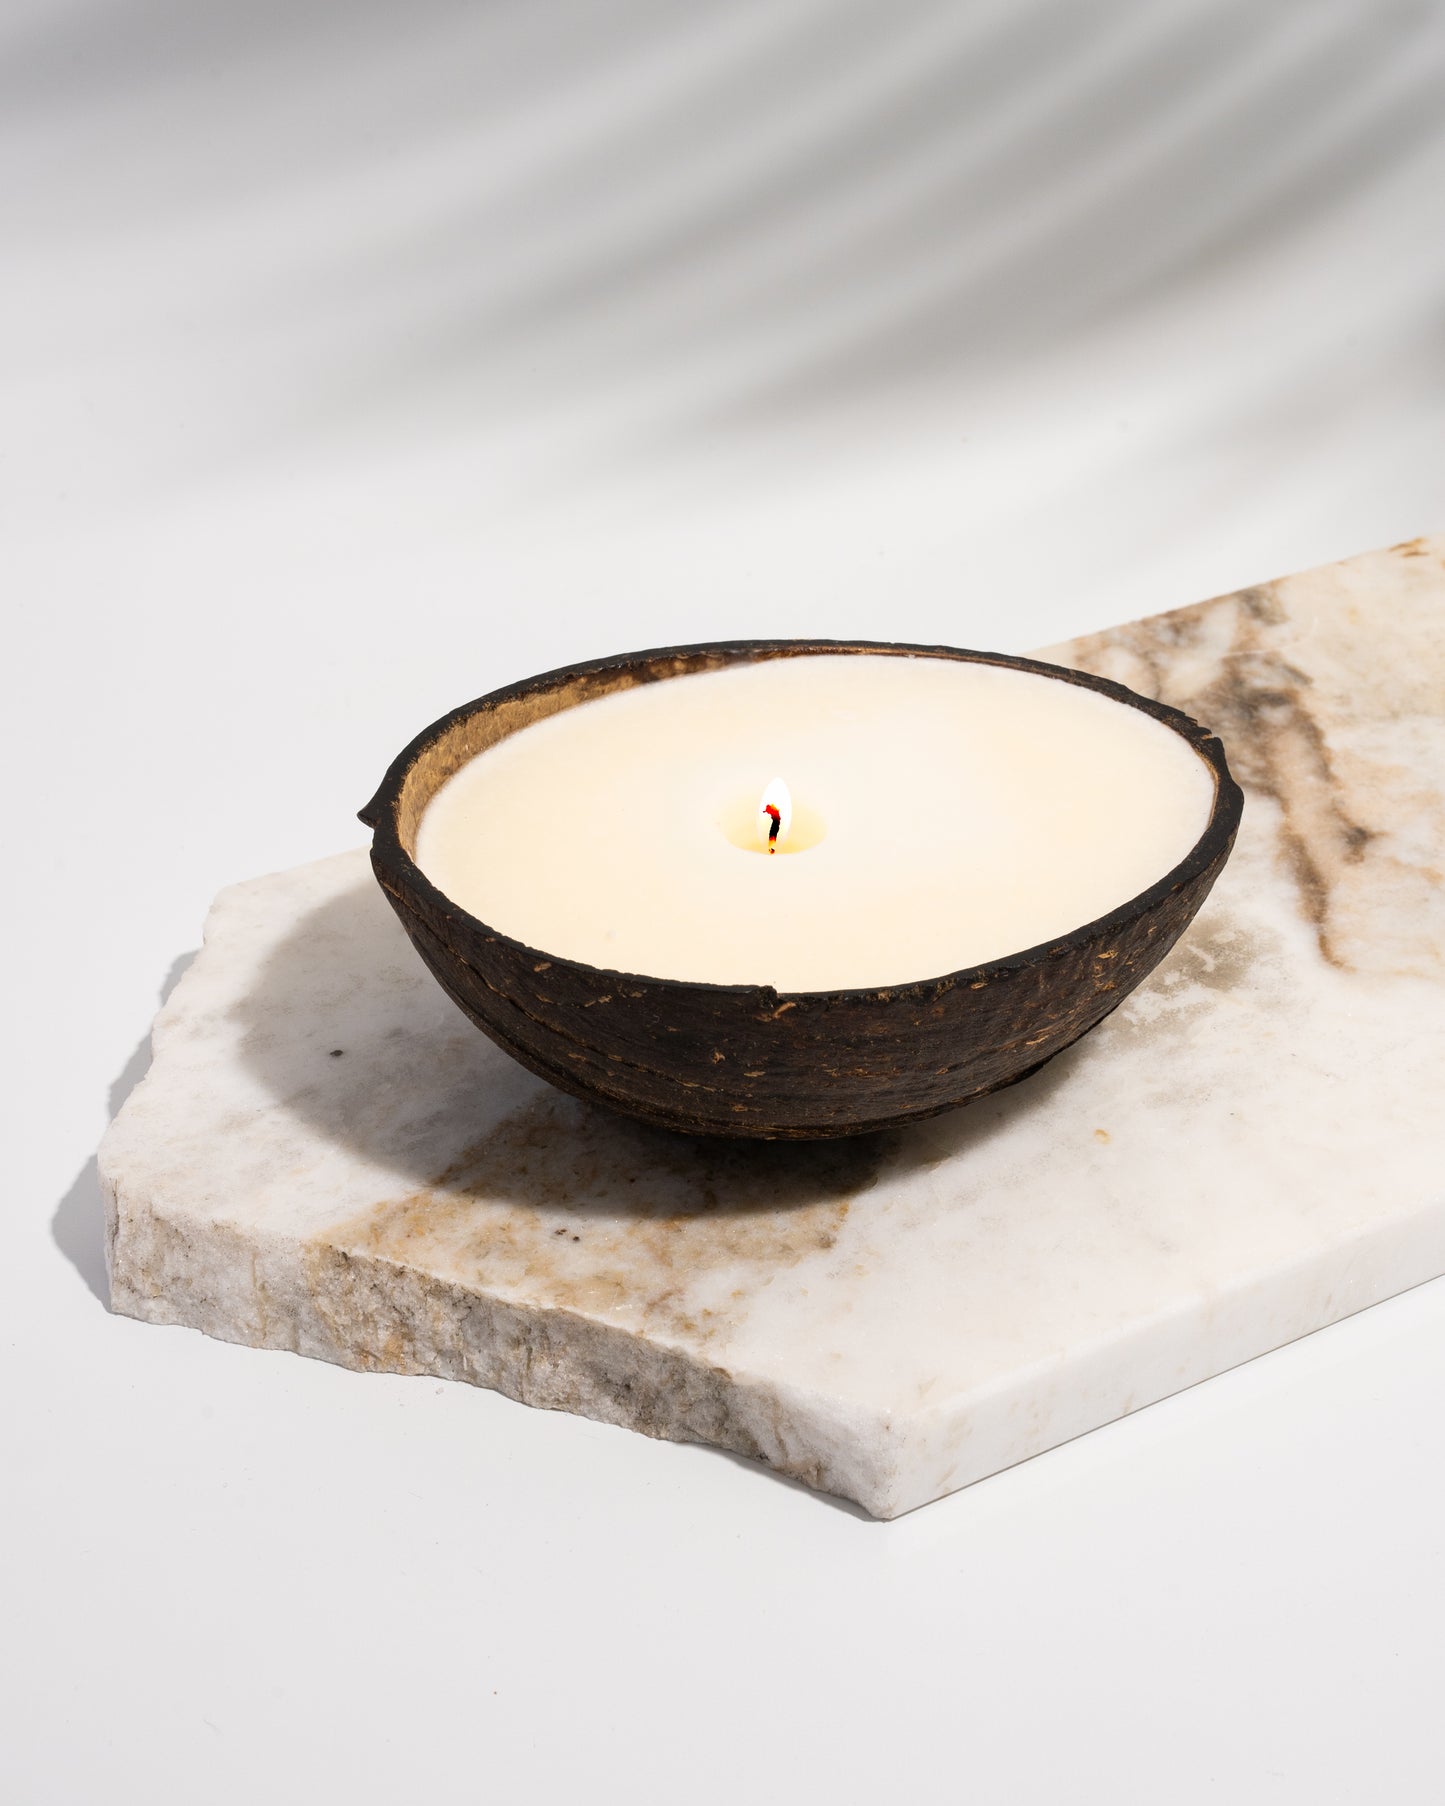 Coco Candle | Tropical Vacation - hand poured soy and coconut wax candle in a reusable natural coconut shell